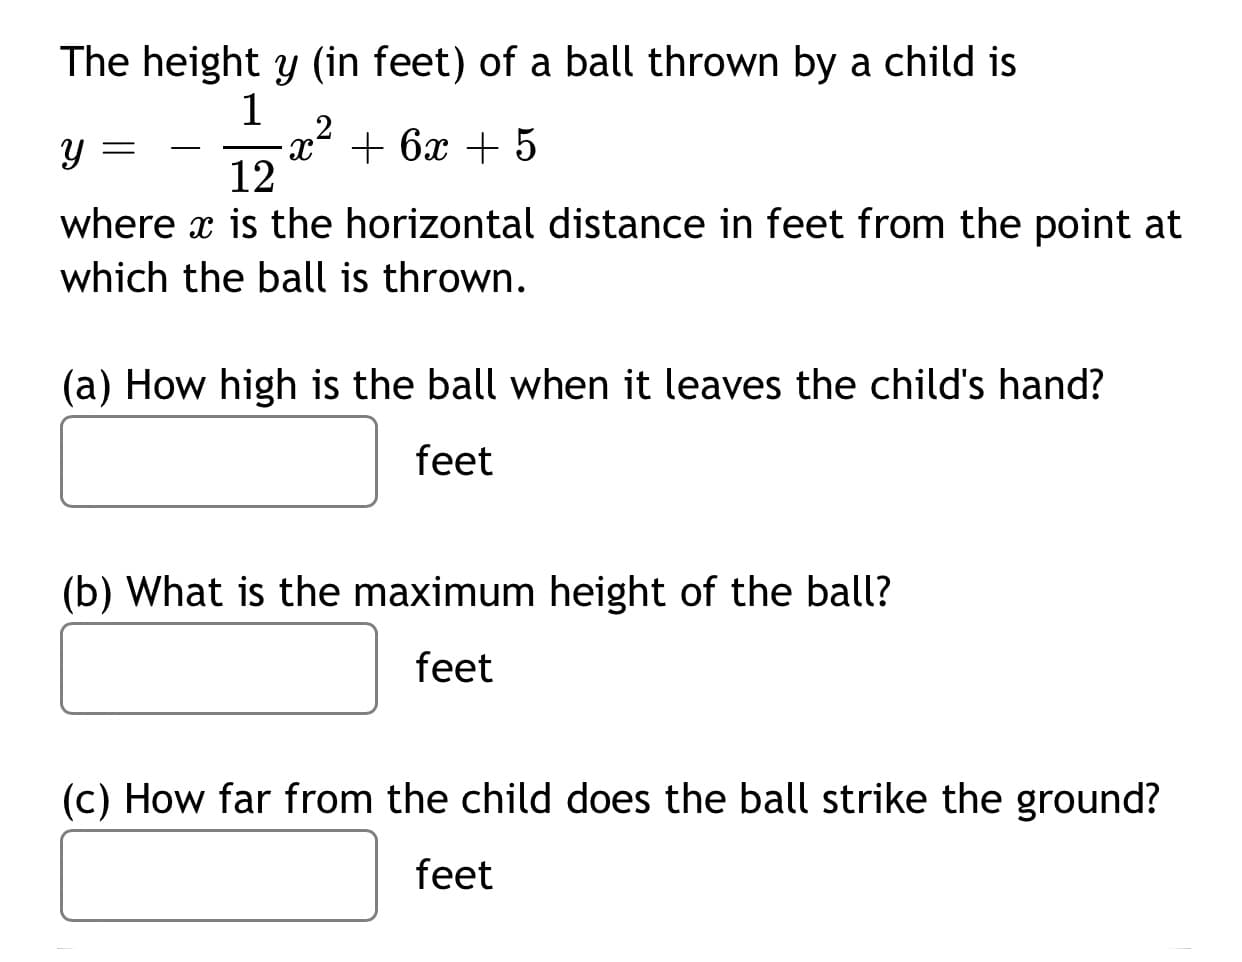 The height y (in feet) of a ball thrown by a child is
1
-x² + 6x + 5
12
-
where x is the horizontal distance in feet from the point at
which the ball is thrown.
(a) How high is the ball when it leaves the child's hand?
feet
(b) What is the maximum height of the ball?
feet
(c) How far from the child does the ball strike the ground?
feet
